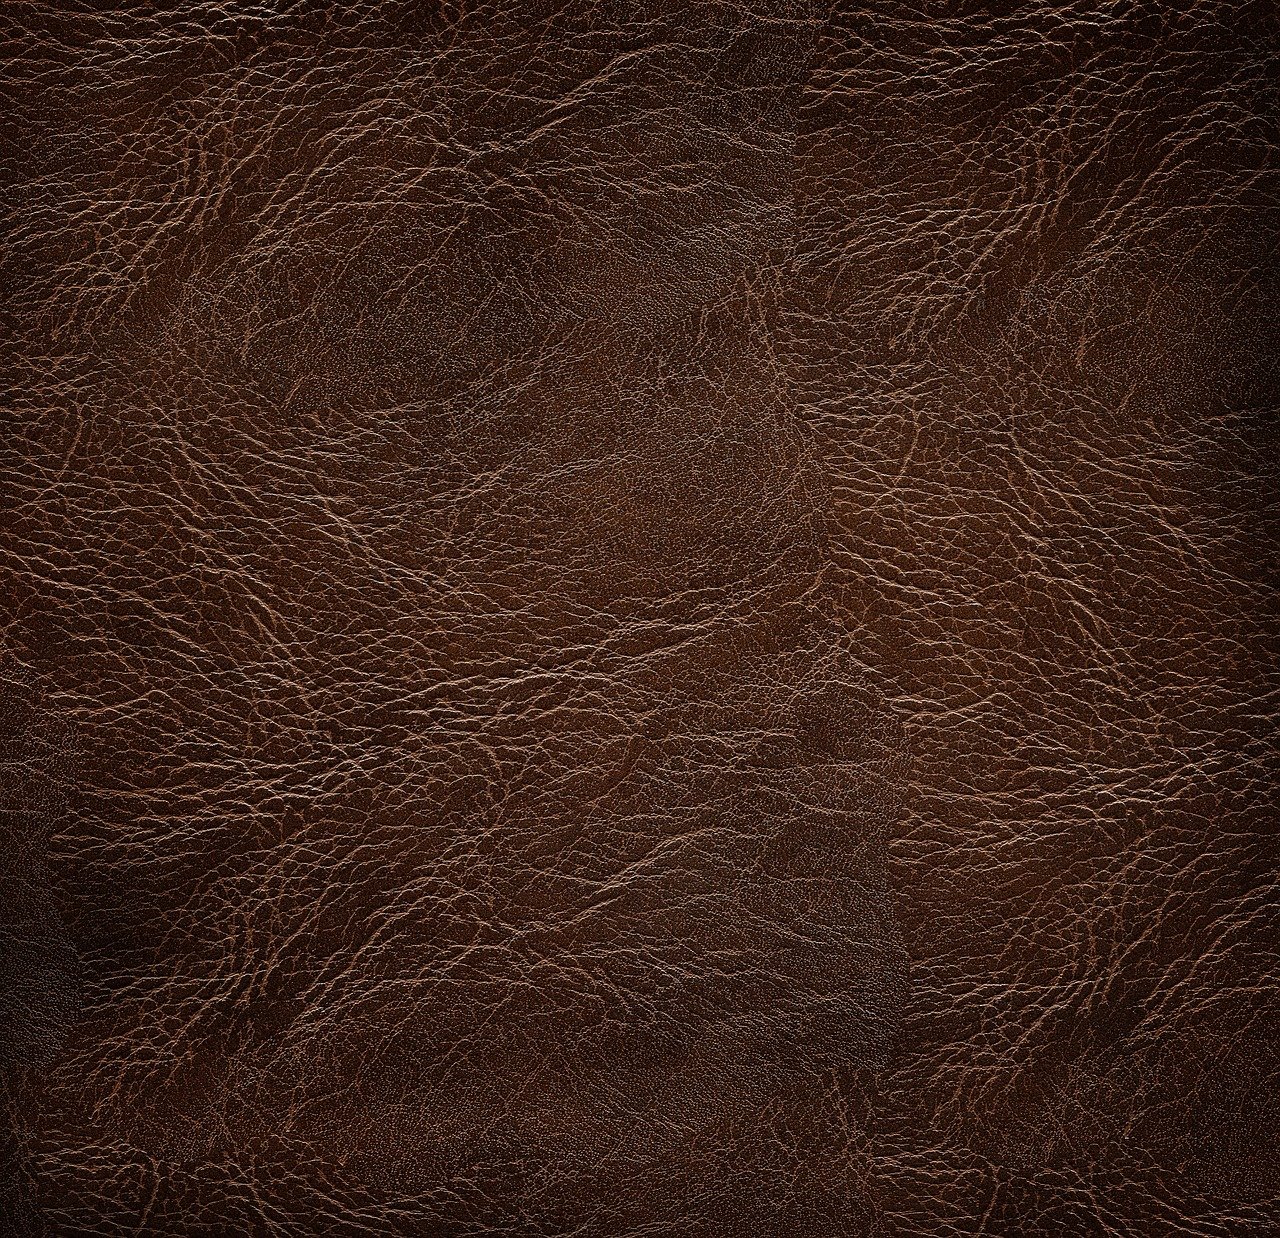 Leather Background